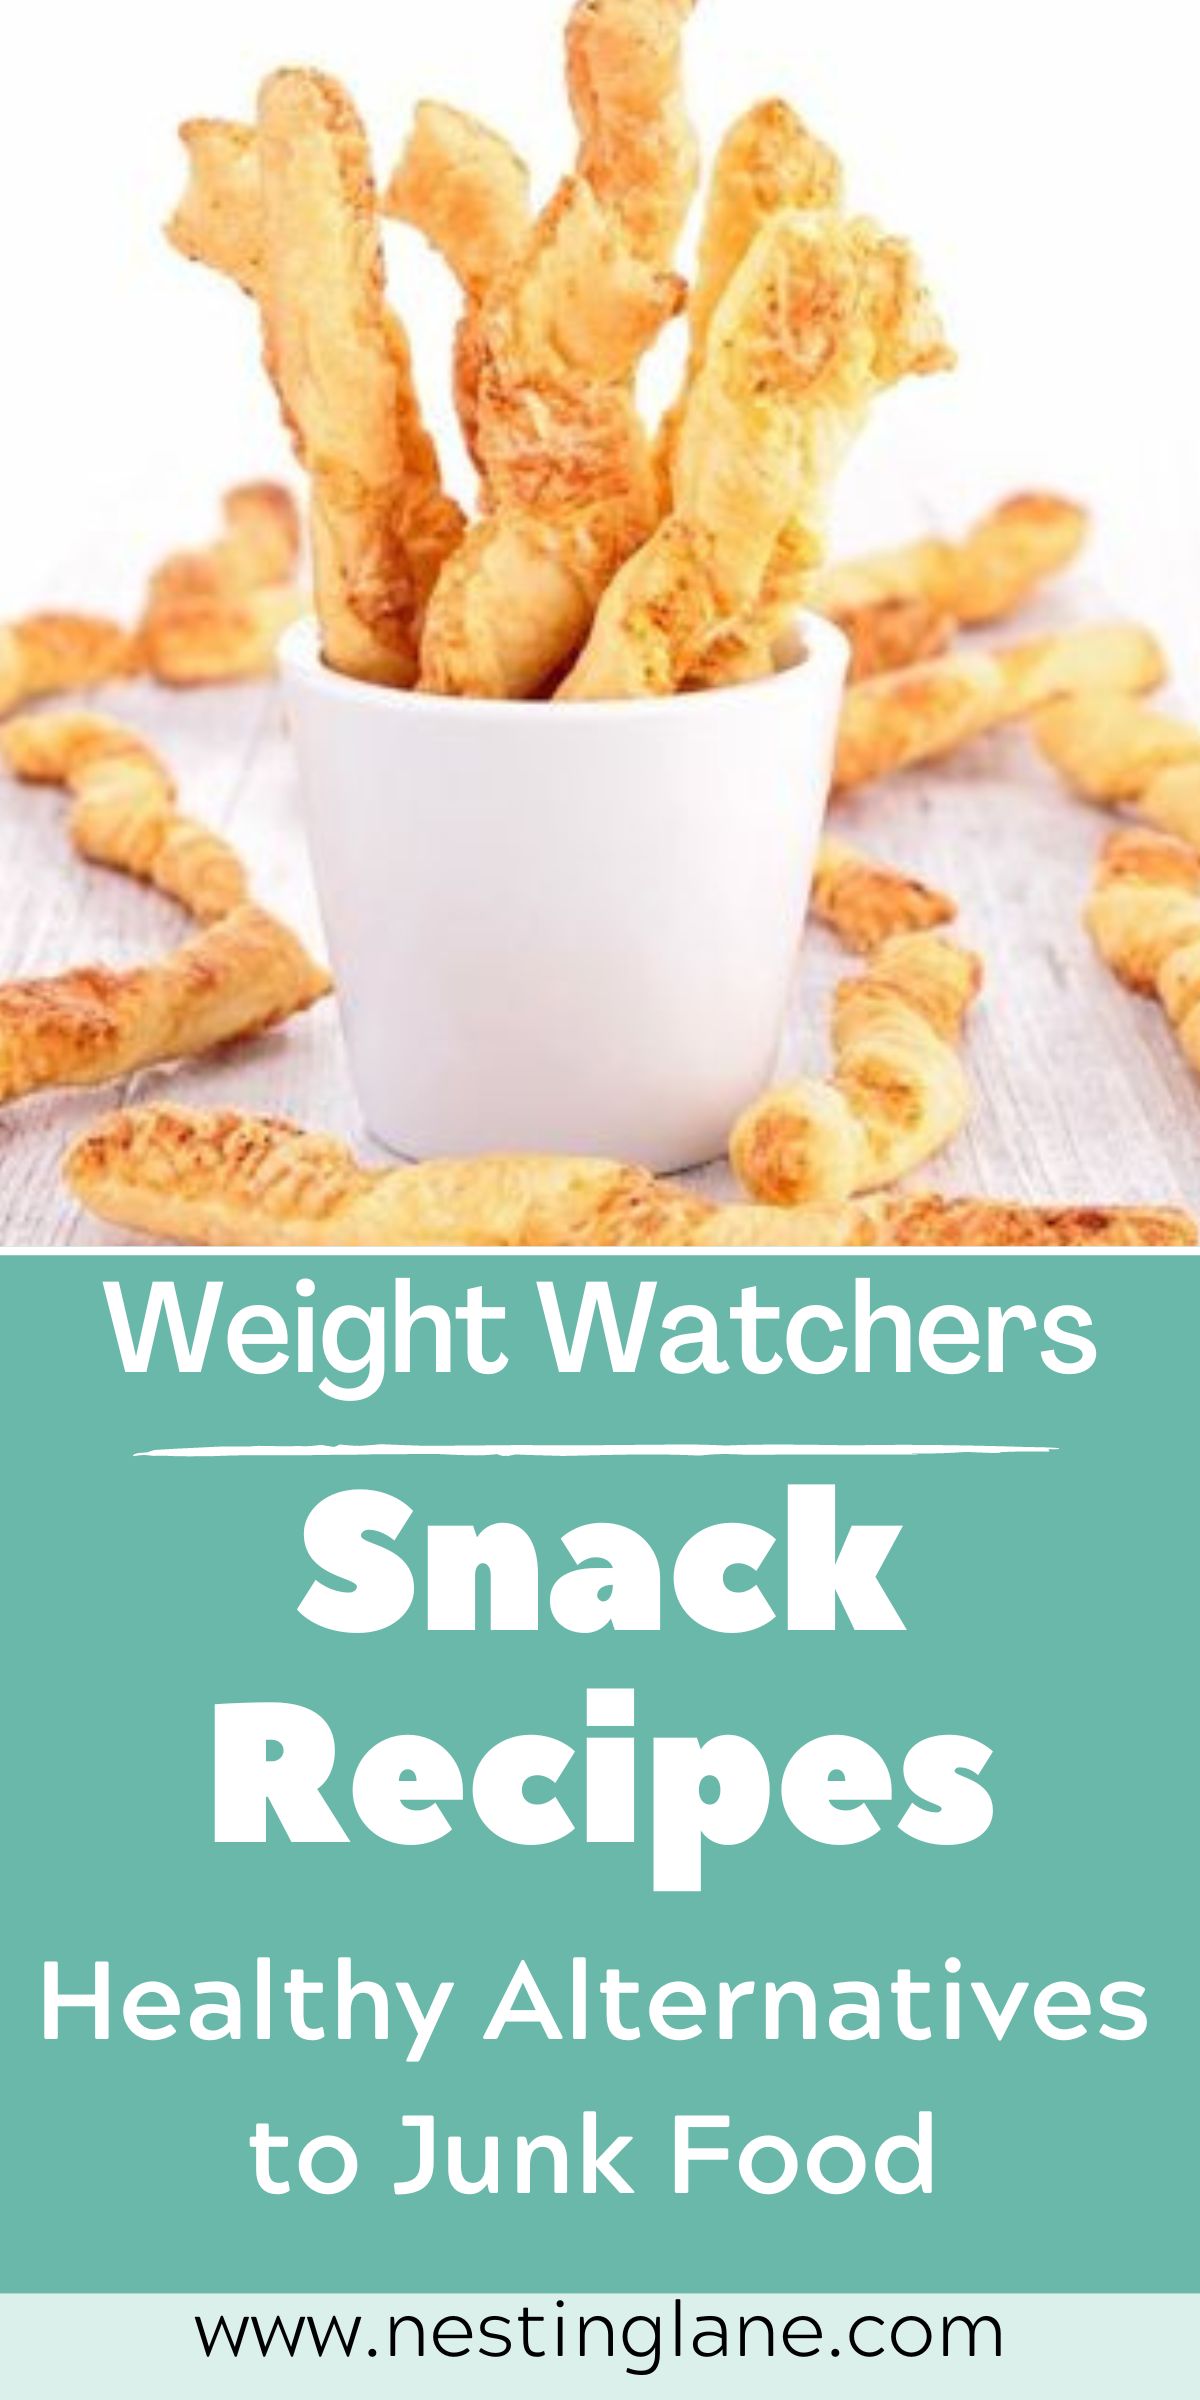 Graphic for Pinterest of Weight Watchers Snack Recipes: Healthy Alternatives to Junk Food.